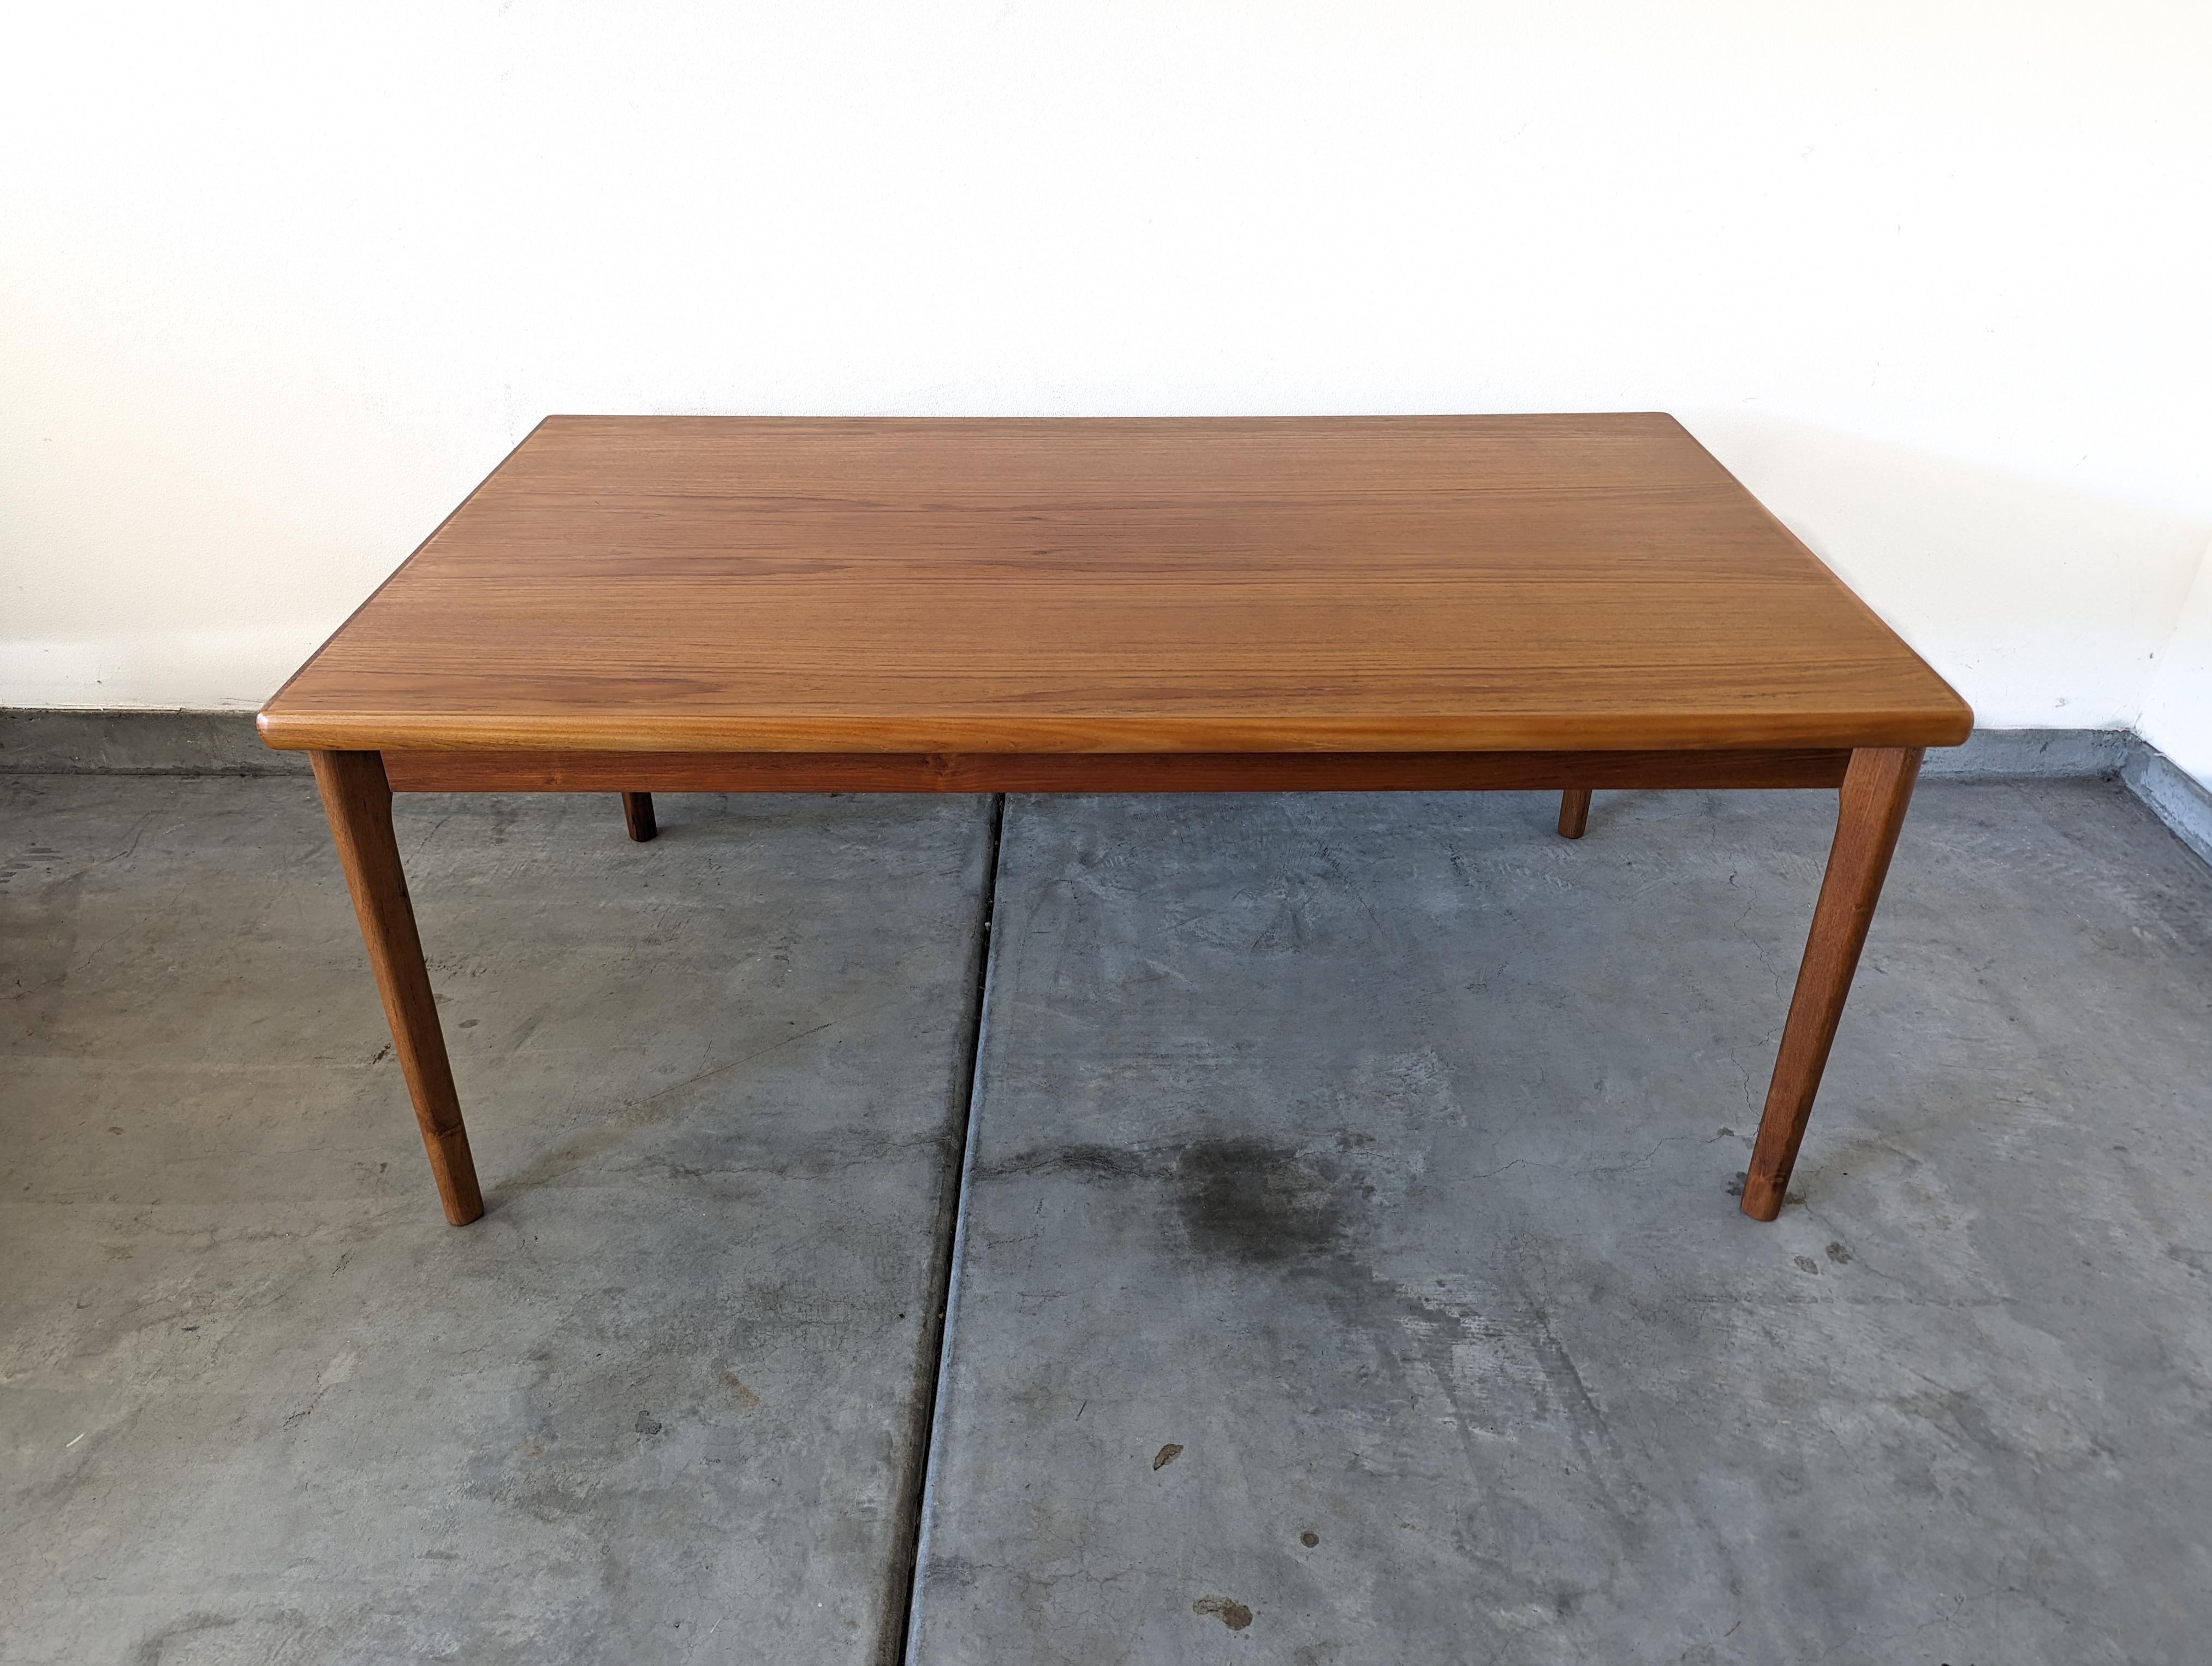 For sale is a stunning vintage mid-century modern Danish teak dining table, masterfully crafted by Gudme Møbelfabrik in the 1960s. This statement piece, with its timeless aesthetic and Danish design pedigree, is sure to be the focal point of your